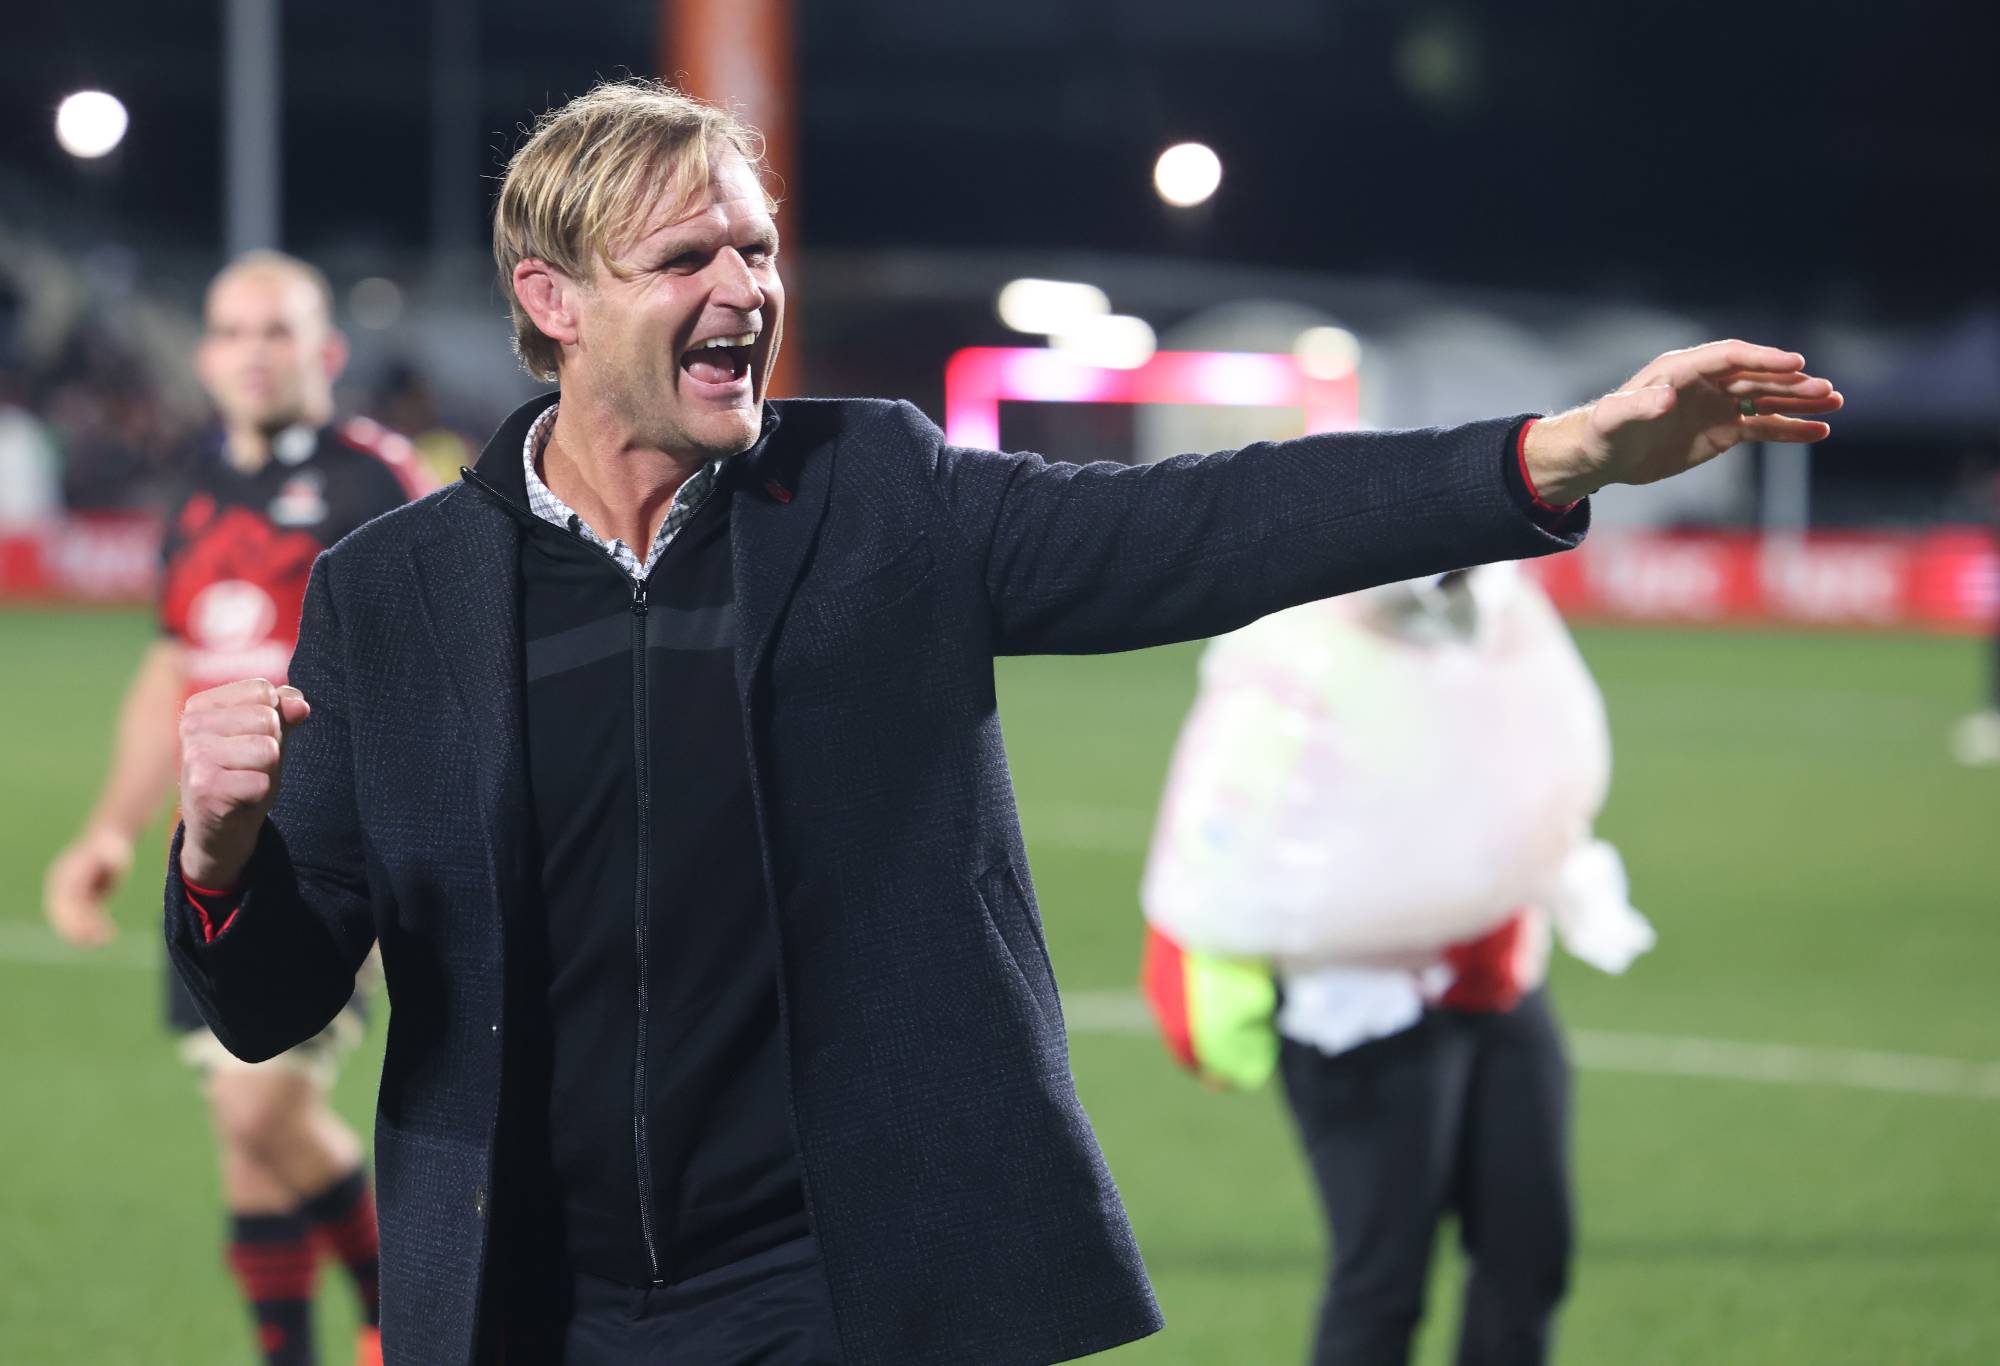 Crusaders head coach Scott Robertson celebrates his 100th game with a win during the Super Rugby Pacific Semi Final match between the Crusaders and the Chiefs at Orangetheory Stadium on June 10, 2022 in Christchurch, New Zealand. (Photo by Peter Meecham/Getty Images)